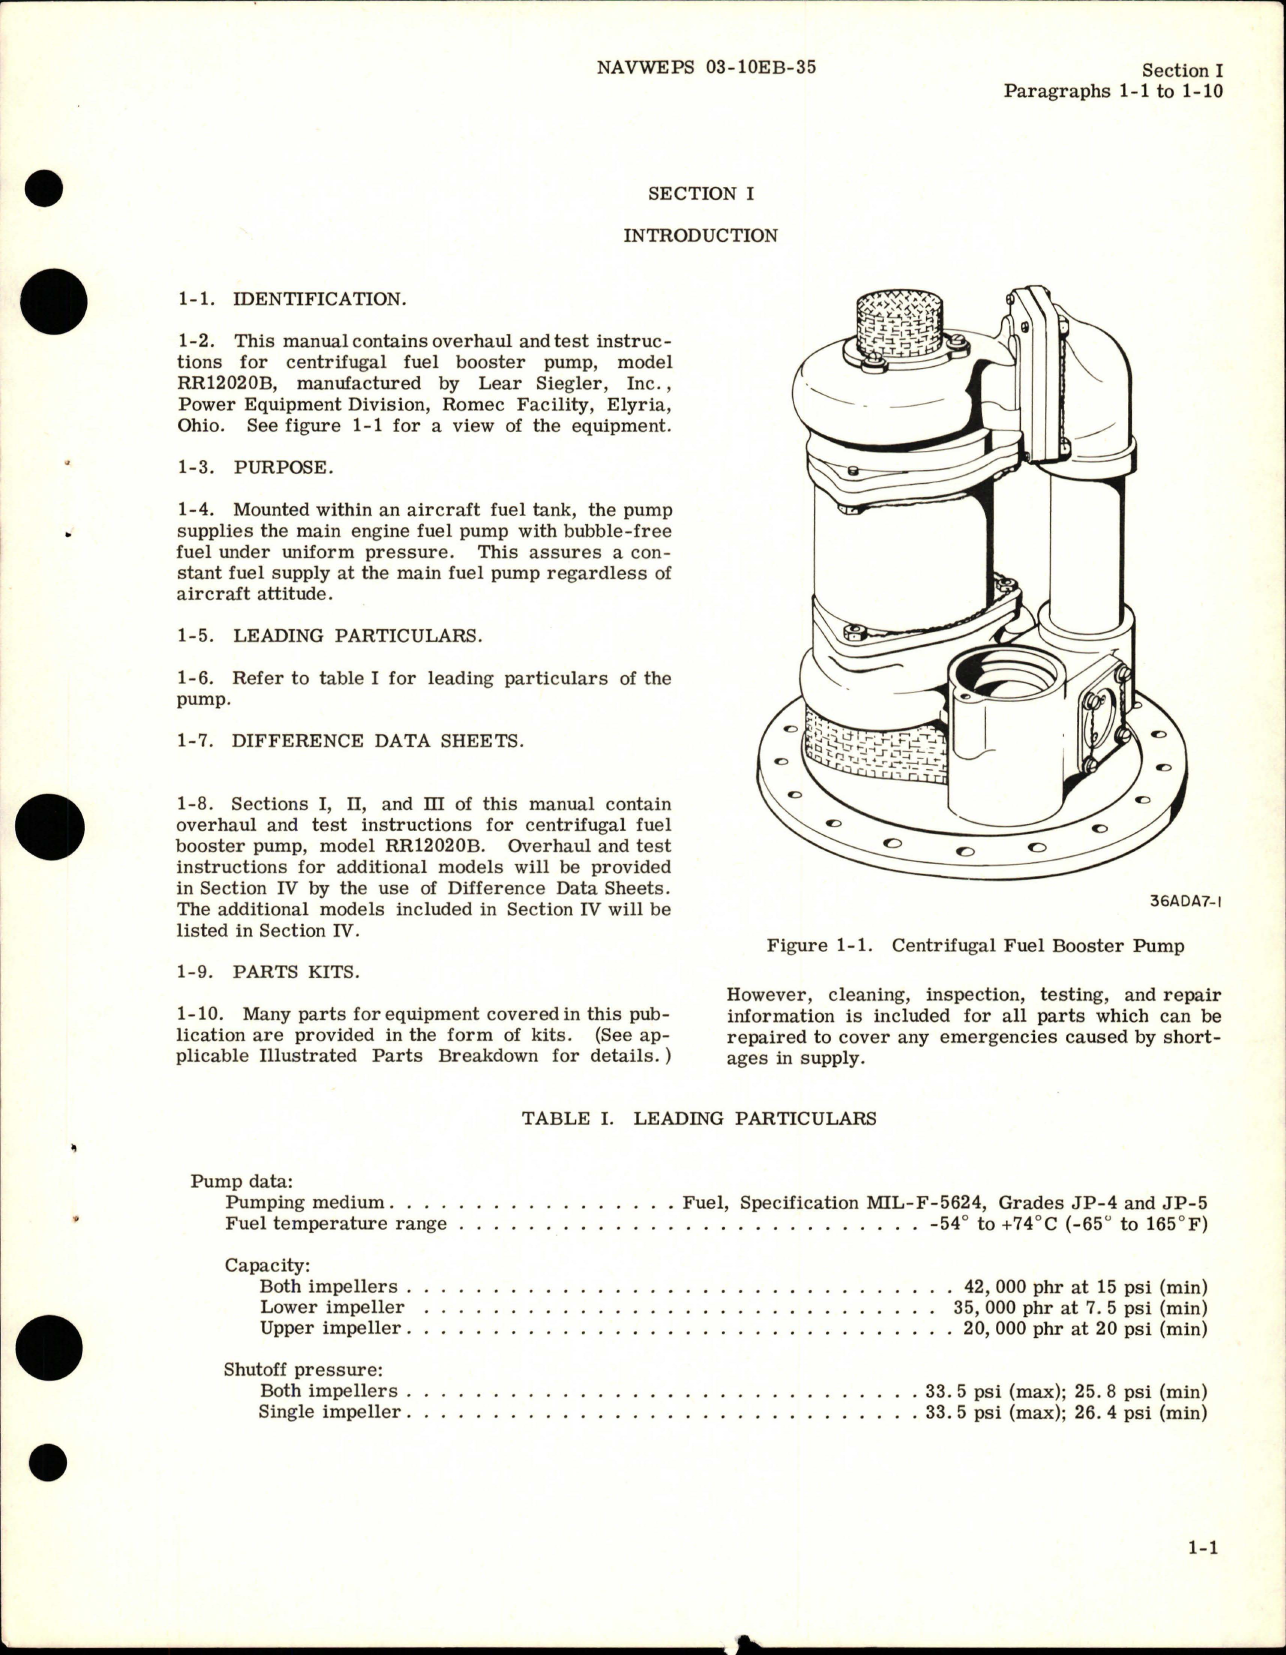 Sample page 5 from AirCorps Library document: Overhaul Instructions for Centrifugal Fuel Booster Pump - Model RR12020B